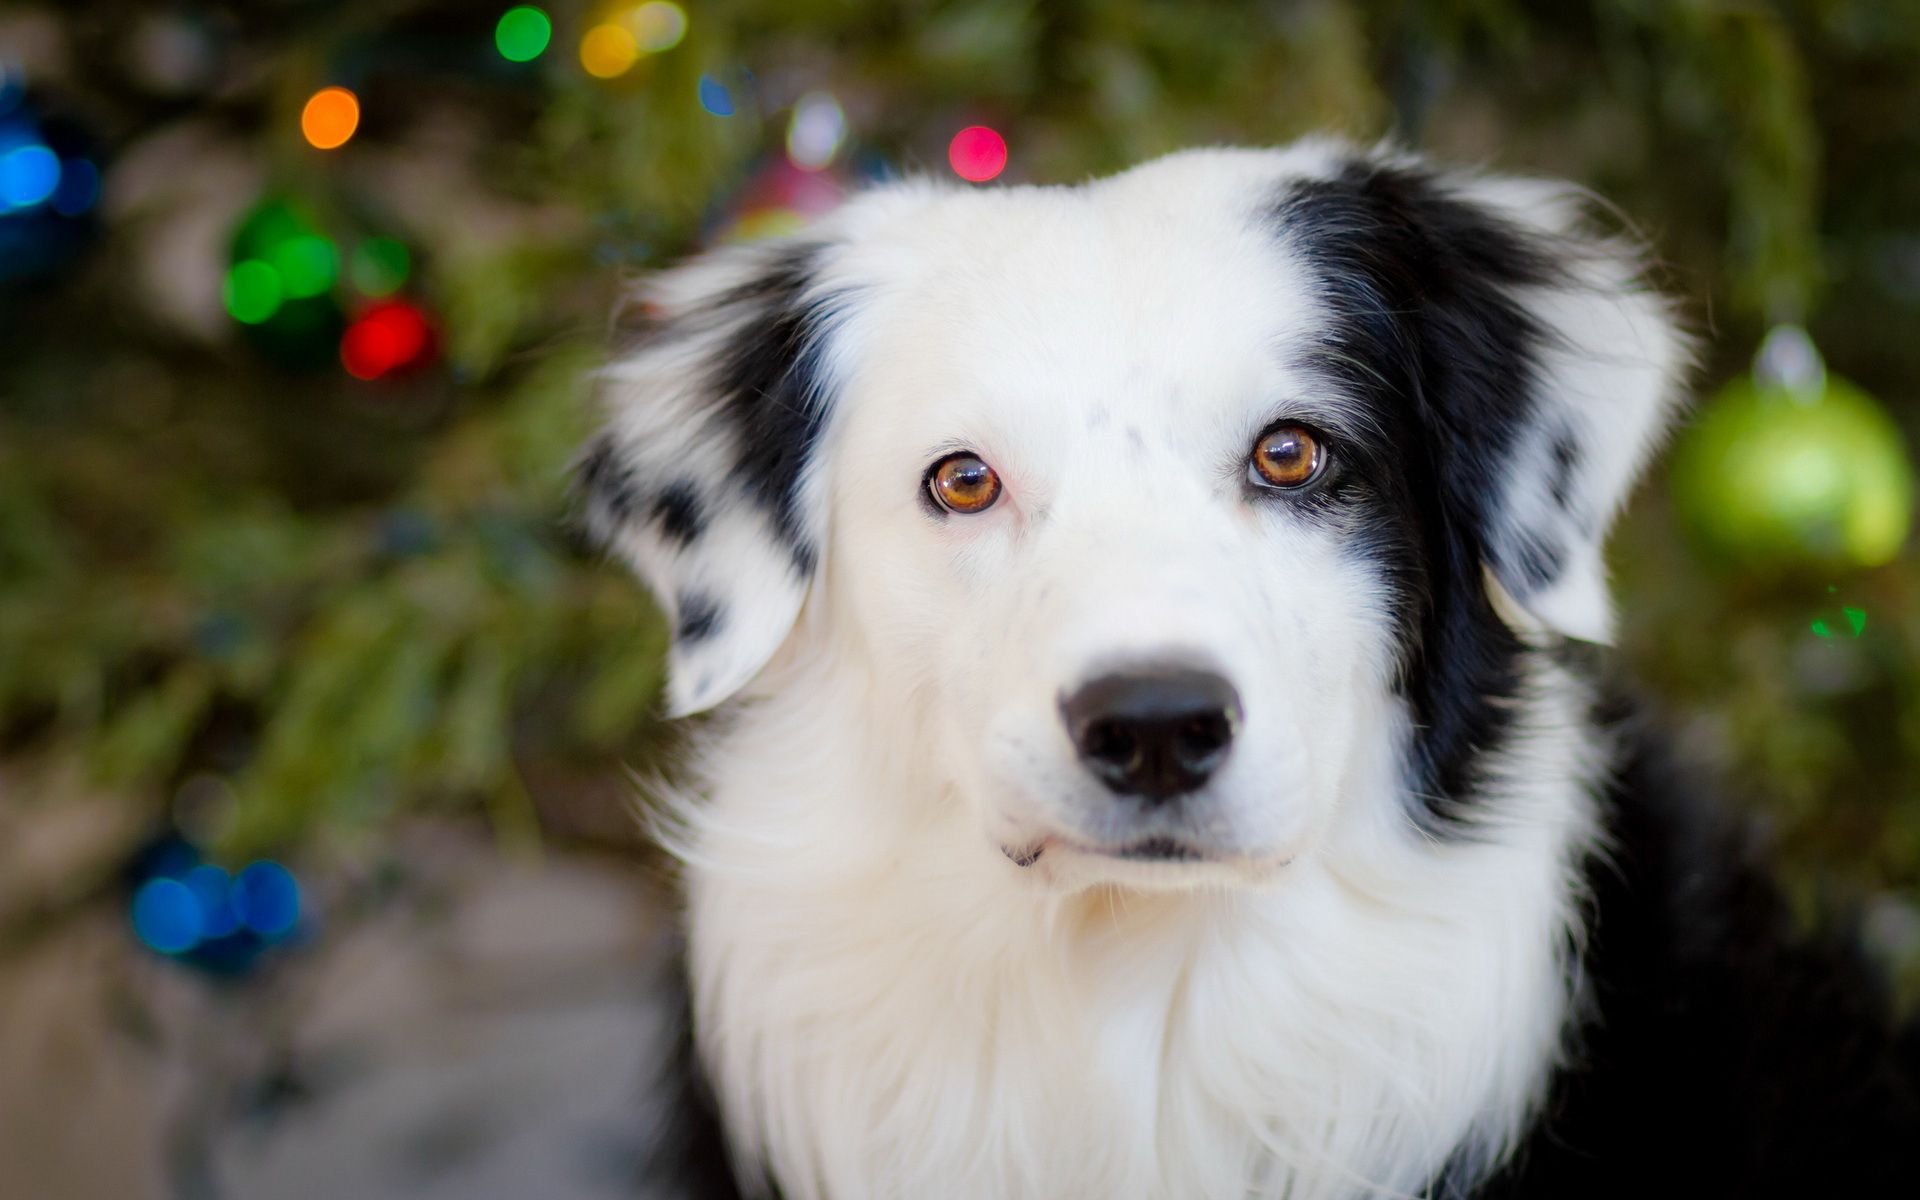 Australian Shepherd dog near a Christmas tree wallpapers and other